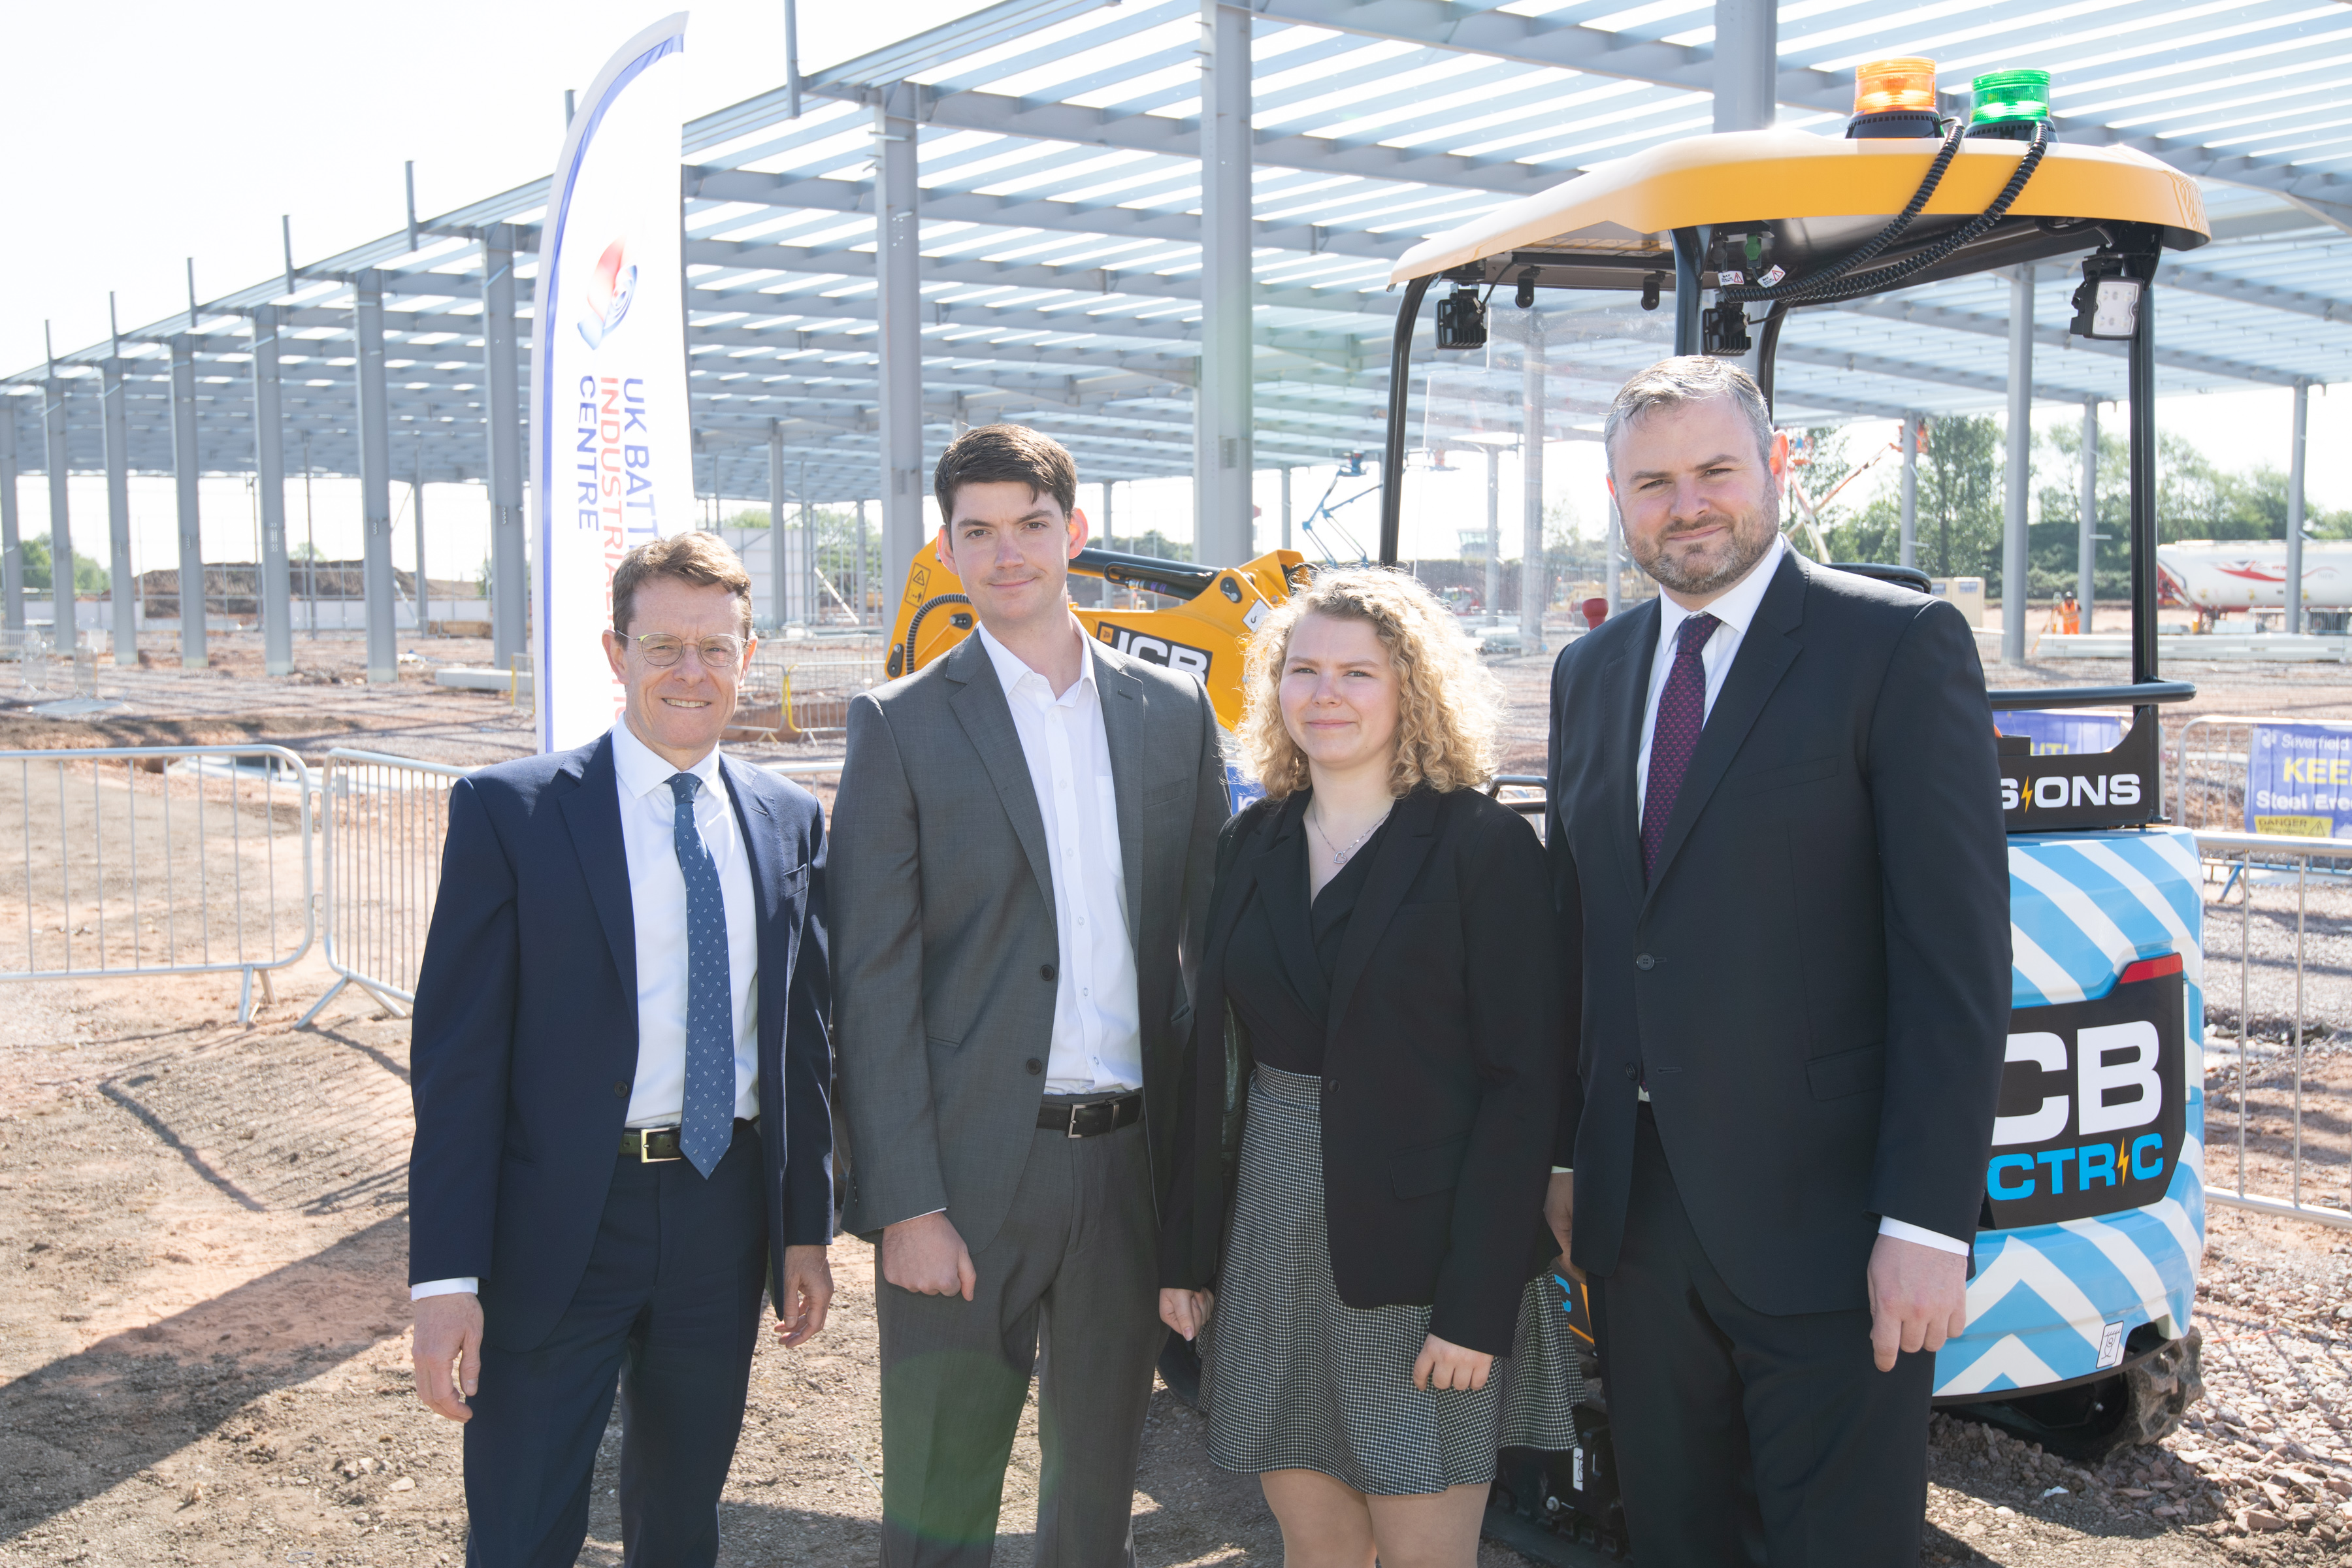 Mayor of the West Midlands Andy Street, George Hull lead engineer at UK Battery Industrialisation Centre, Eve Wheeler-Jones PhD student at WMG and Minister for Business and Industry Andrew Stephenson at the UK Battery Industrialisation Centre  under construction in Coventry